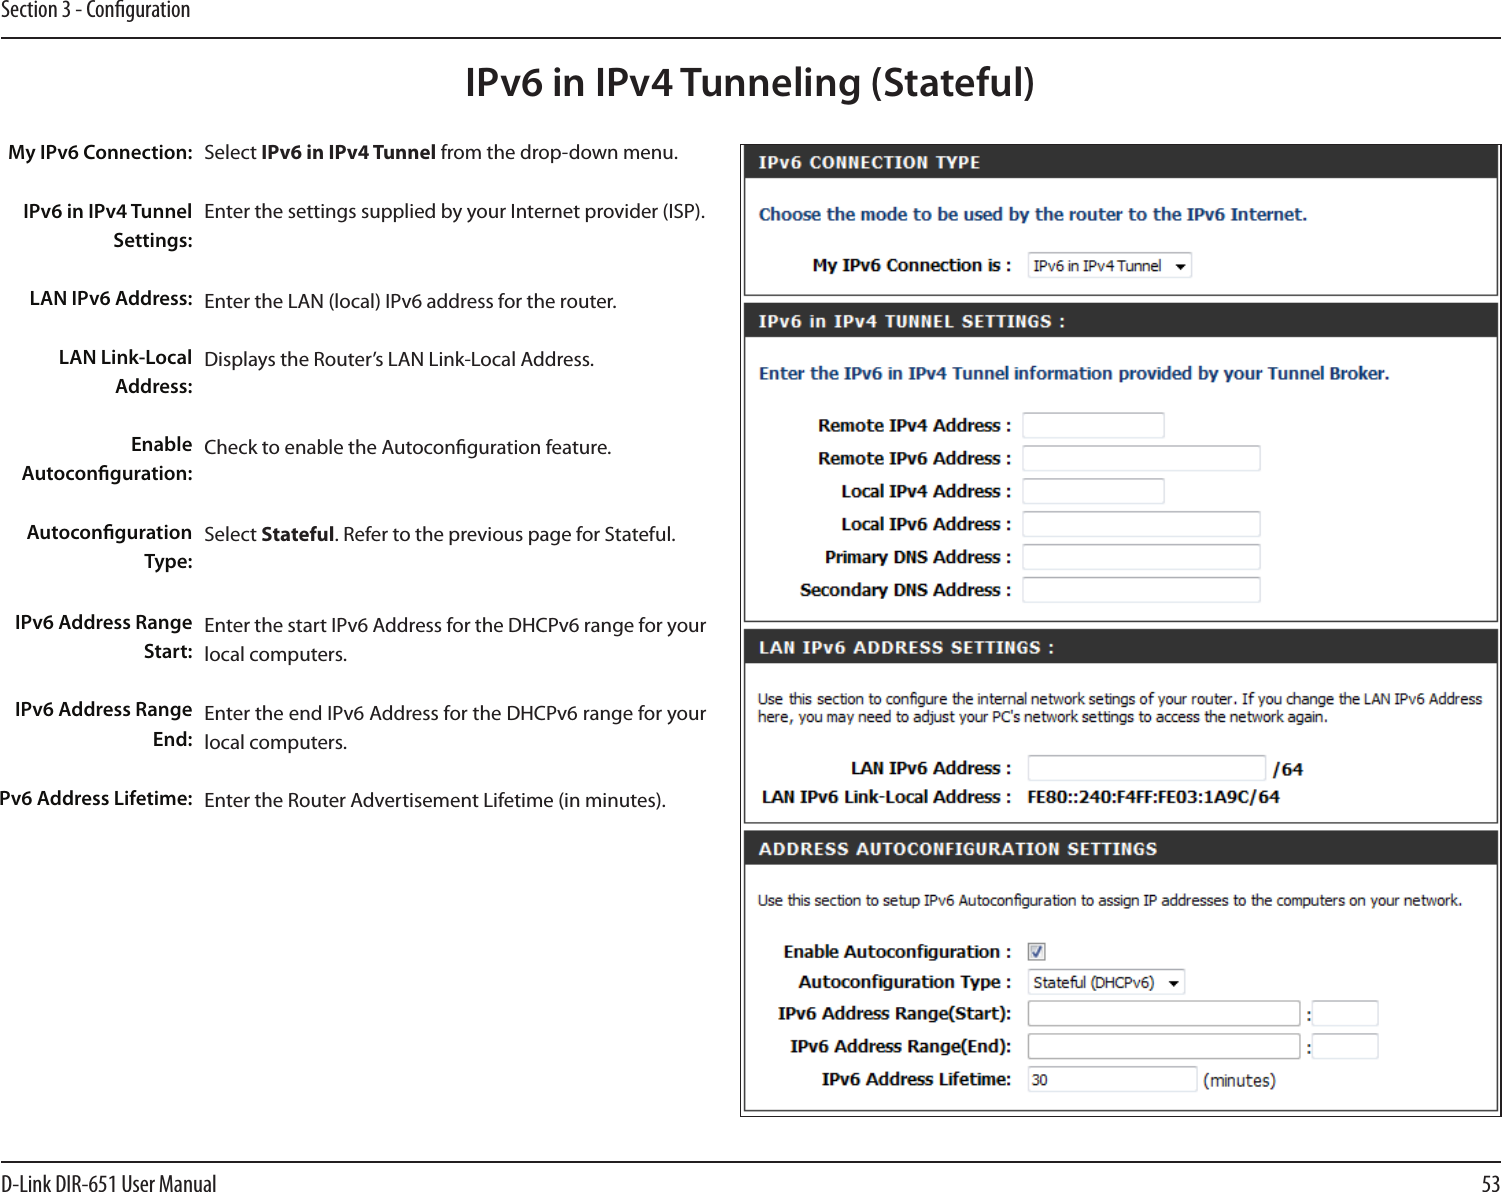 53D-Link DIR-651 User ManualSection 3 - CongurationIPv6 in IPv4 Tunneling (Stateful)Select IPv6 in IPv4 Tunnel from the drop-down menu.Enter the settings supplied by your Internet provider (ISP). Enter the LAN (local) IPv6 address for the router. Displays the Router’s LAN Link-Local Address.Check to enable the Autoconguration feature.Select Stateful. Refer to the previous page for Stateful.Enter the start IPv6 Address for the DHCPv6 range for your local computers.Enter the end IPv6 Address for the DHCPv6 range for your local computers.Enter the Router Advertisement Lifetime (in minutes).My IPv6 Connection:IPv6 in IPv4 Tunnel Settings:LAN IPv6 Address:LAN Link-Local Address:Enable Autoconguration:Autoconguration Type:IPv6 Address Range Start:IPv6 Address Range End:Pv6 Address Lifetime: